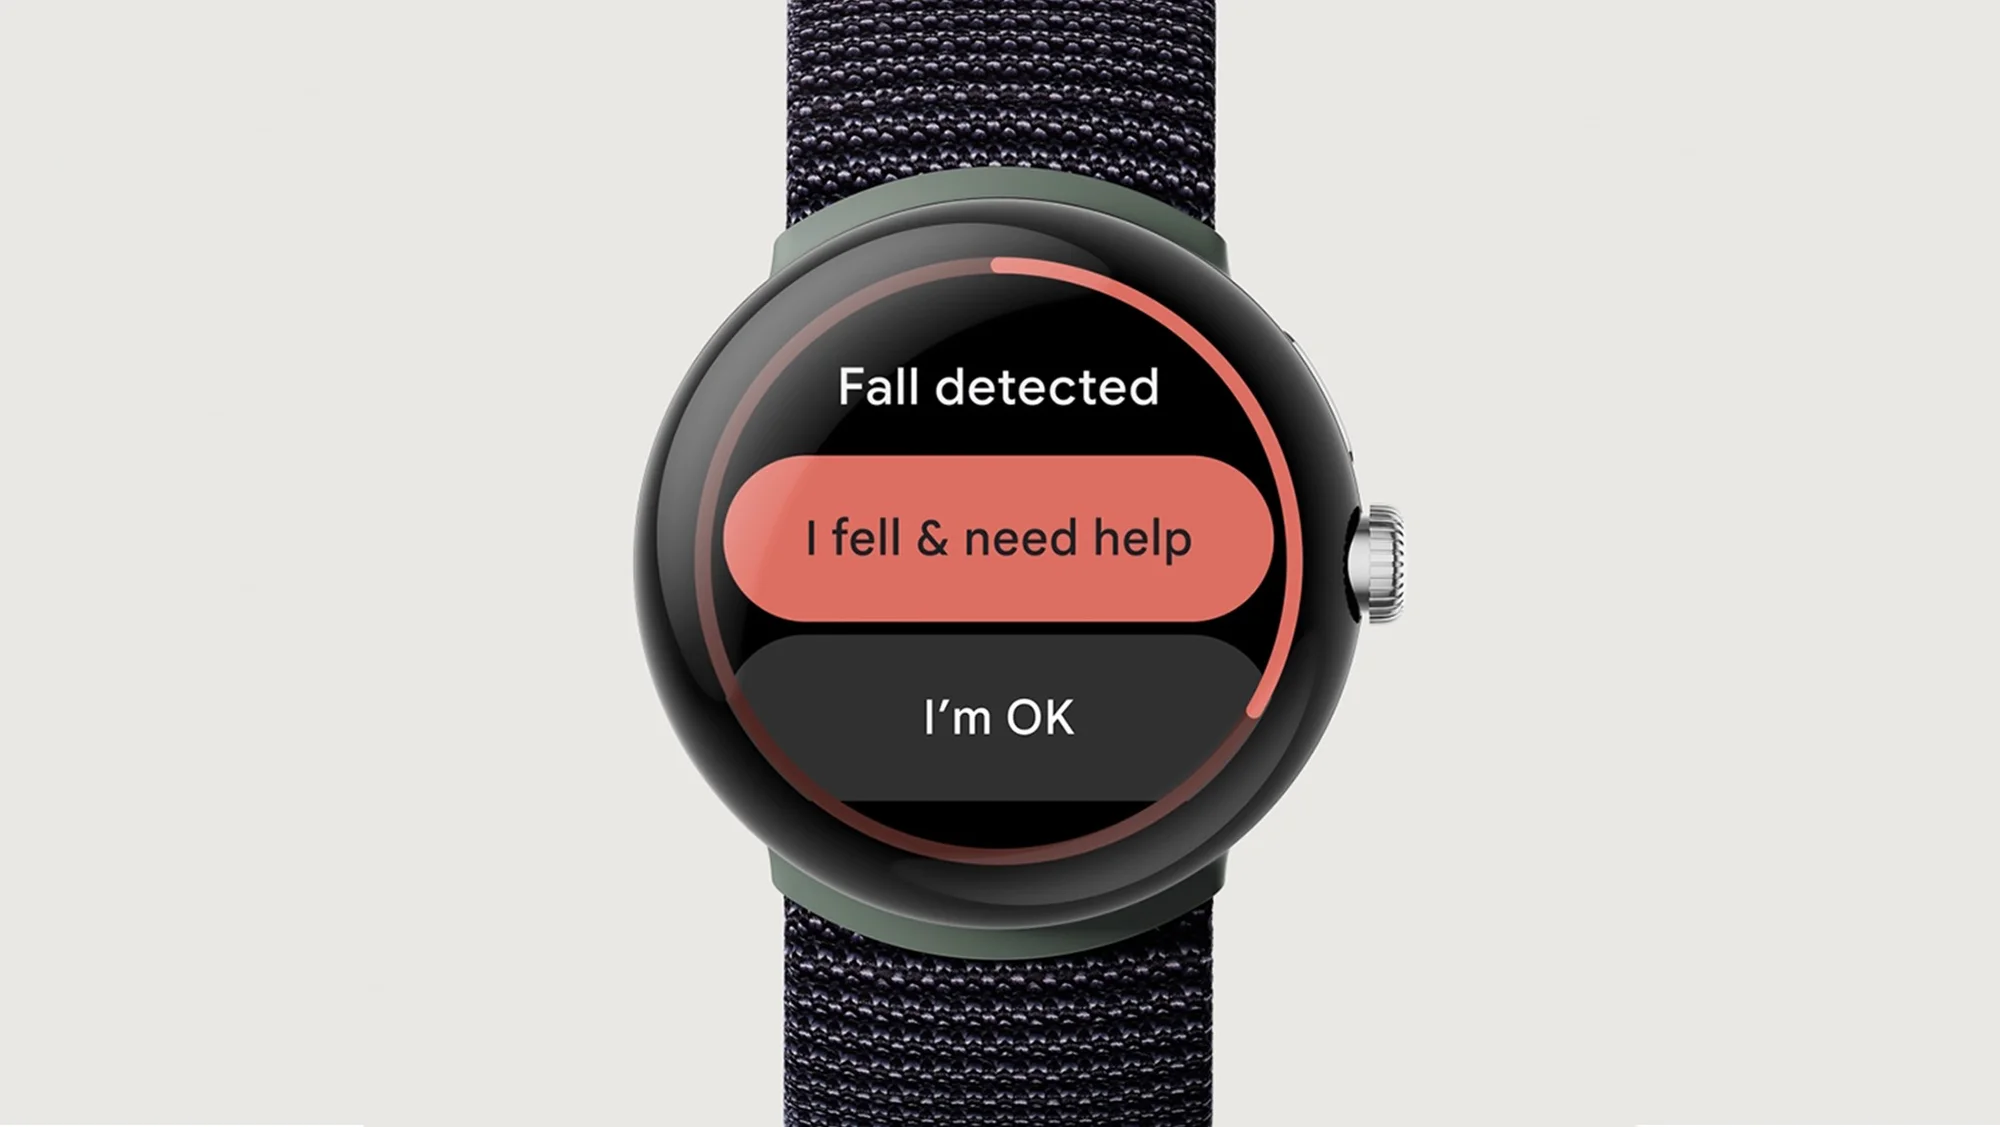 Google Pixel Watch can now detect when you fall